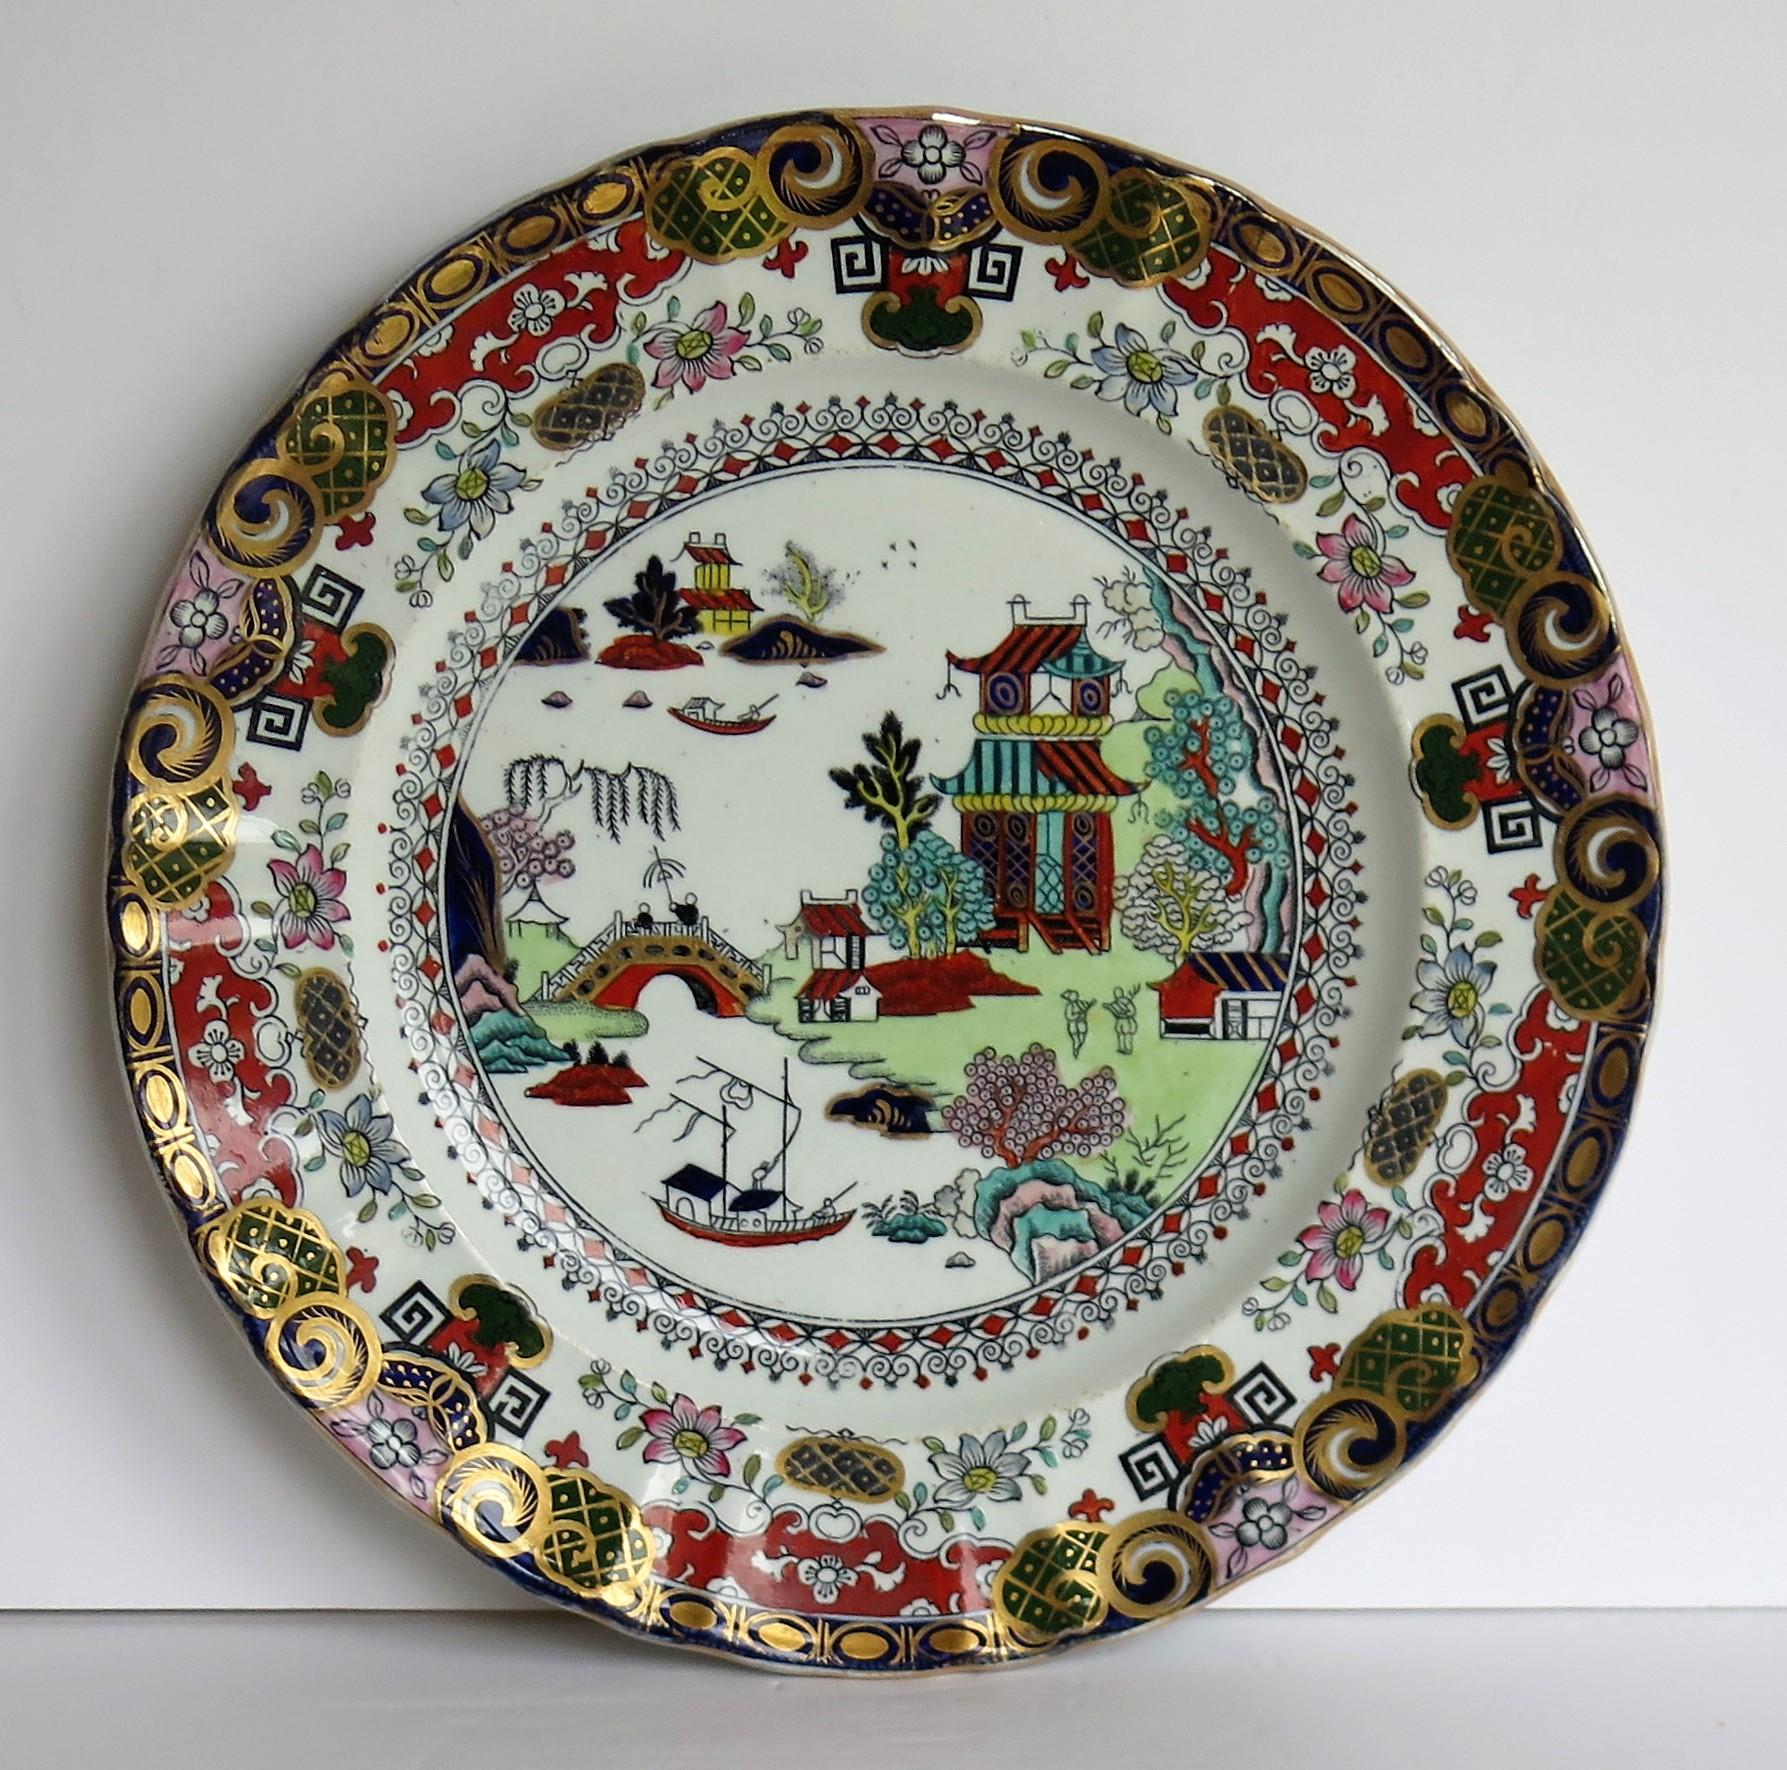 This is a very good, finely hand enamelled, Mason’s ironstone dinner plate produced at the time when Mason's was owned and controlled by George L Ashworth and Brothers after the bankruptcy of C J Mason in 1848.

This plate is beautifully decorated